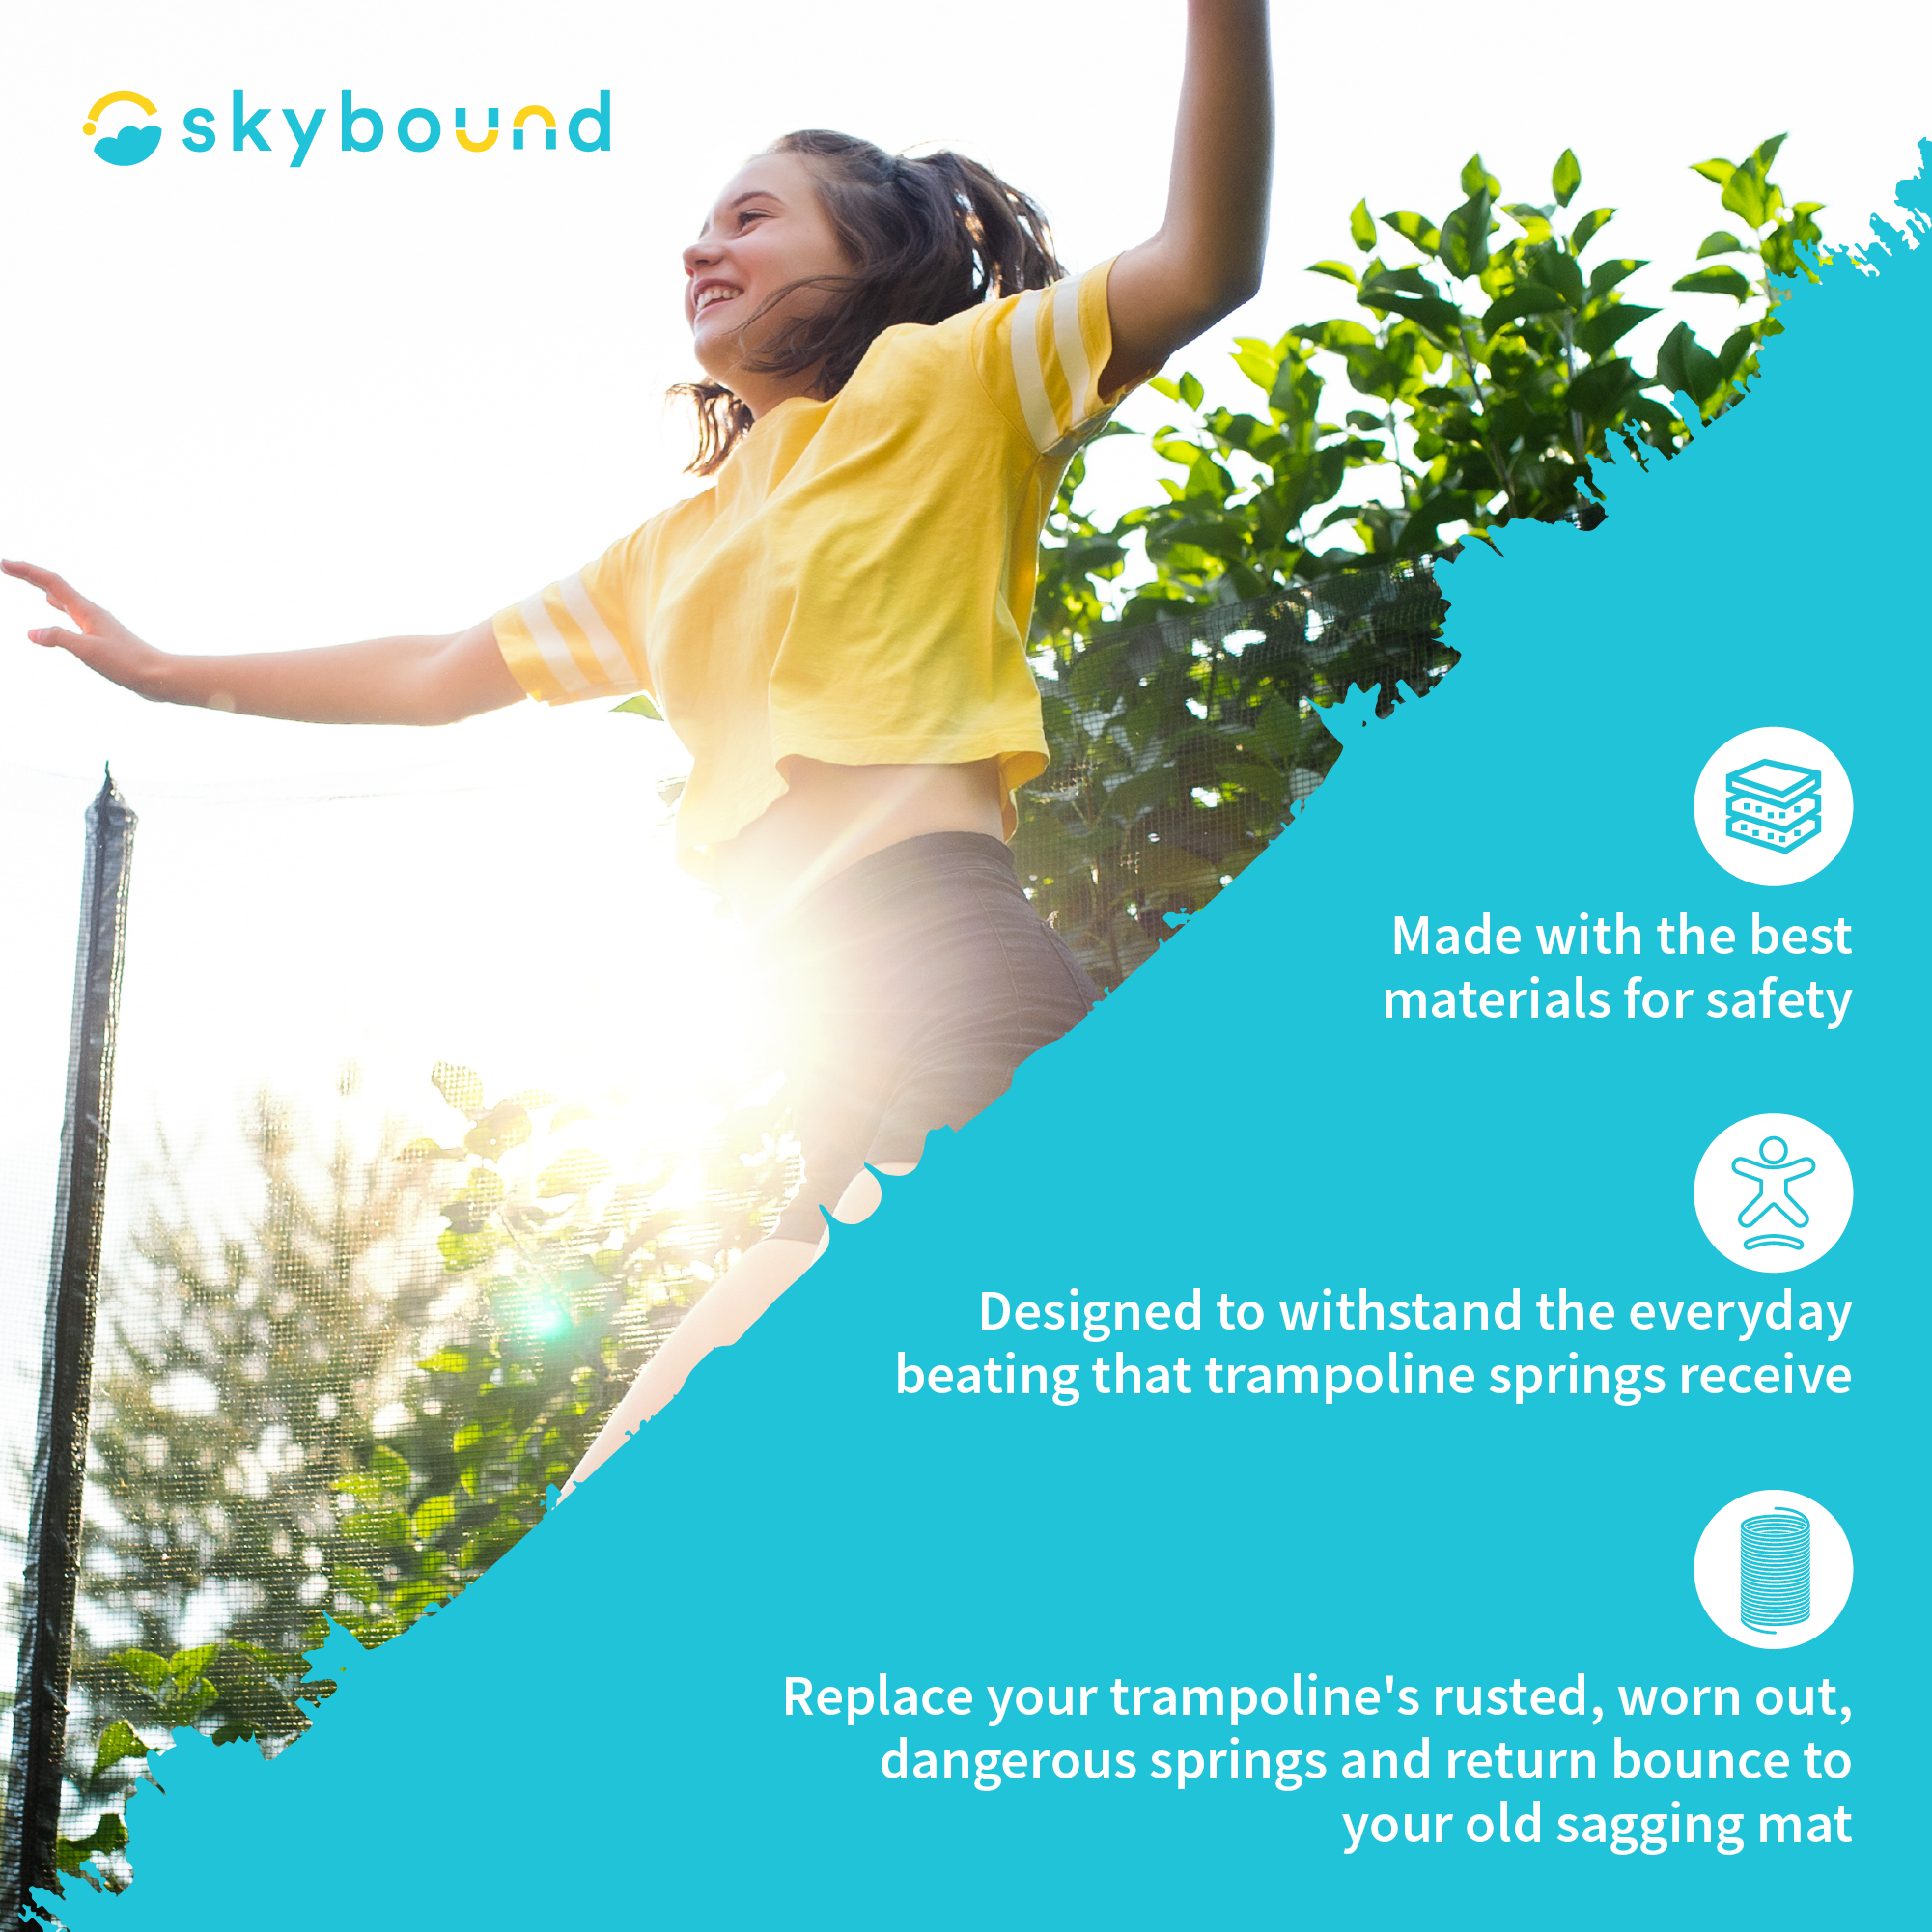 Girl jumping on Trampoline: SkyBound: Material is made with the best materials for safety. Two-piece pad for quicker installation. UV-resistant coating protects against long-term sun damage.